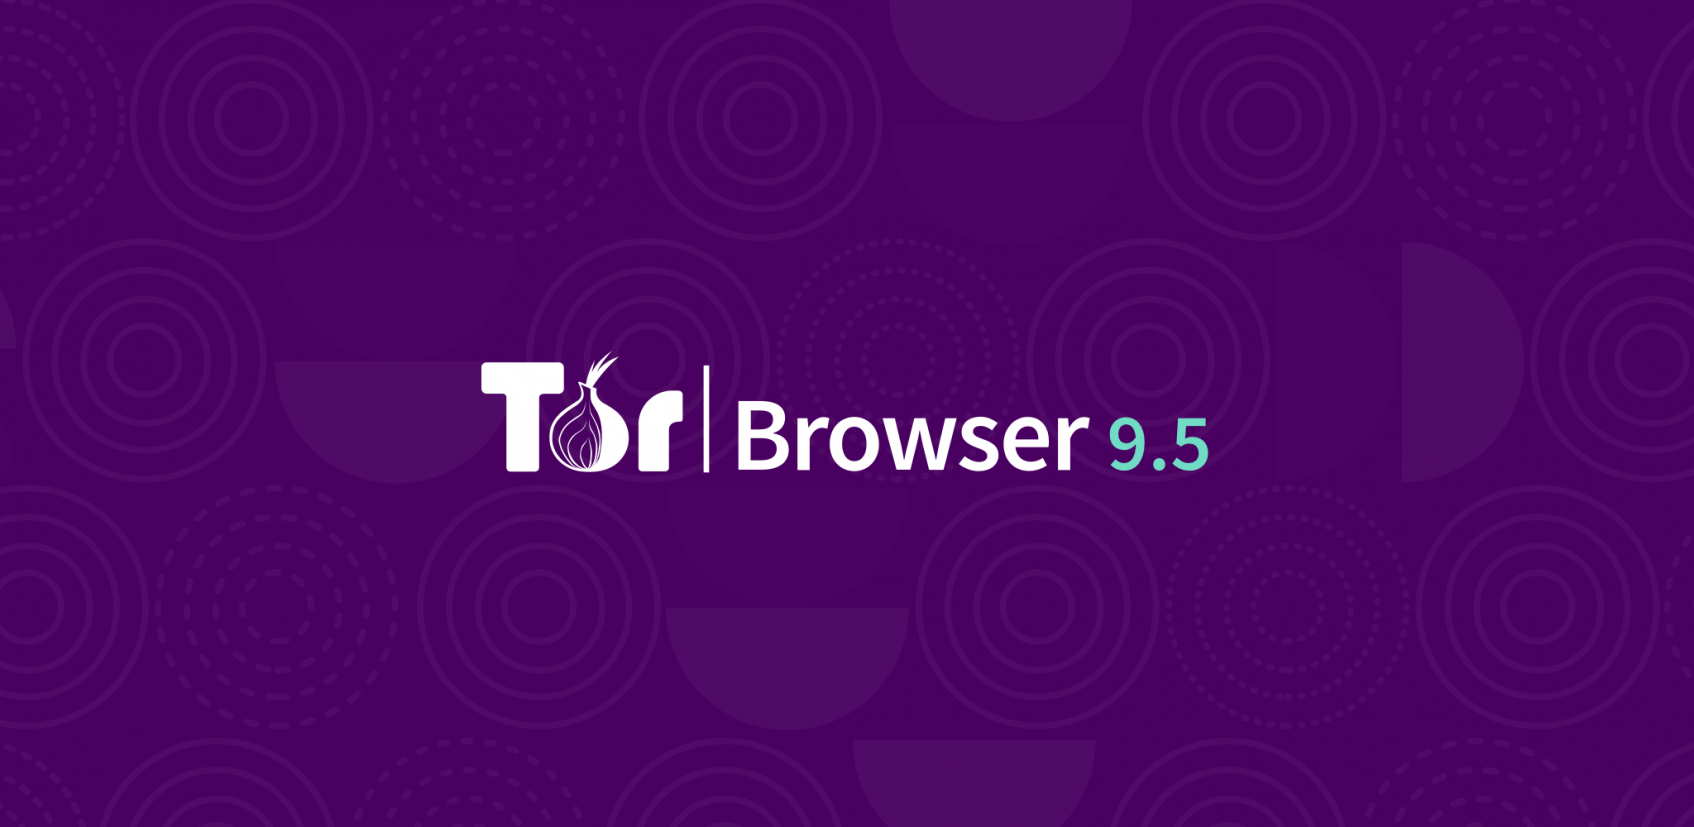 tor browser releases gydra